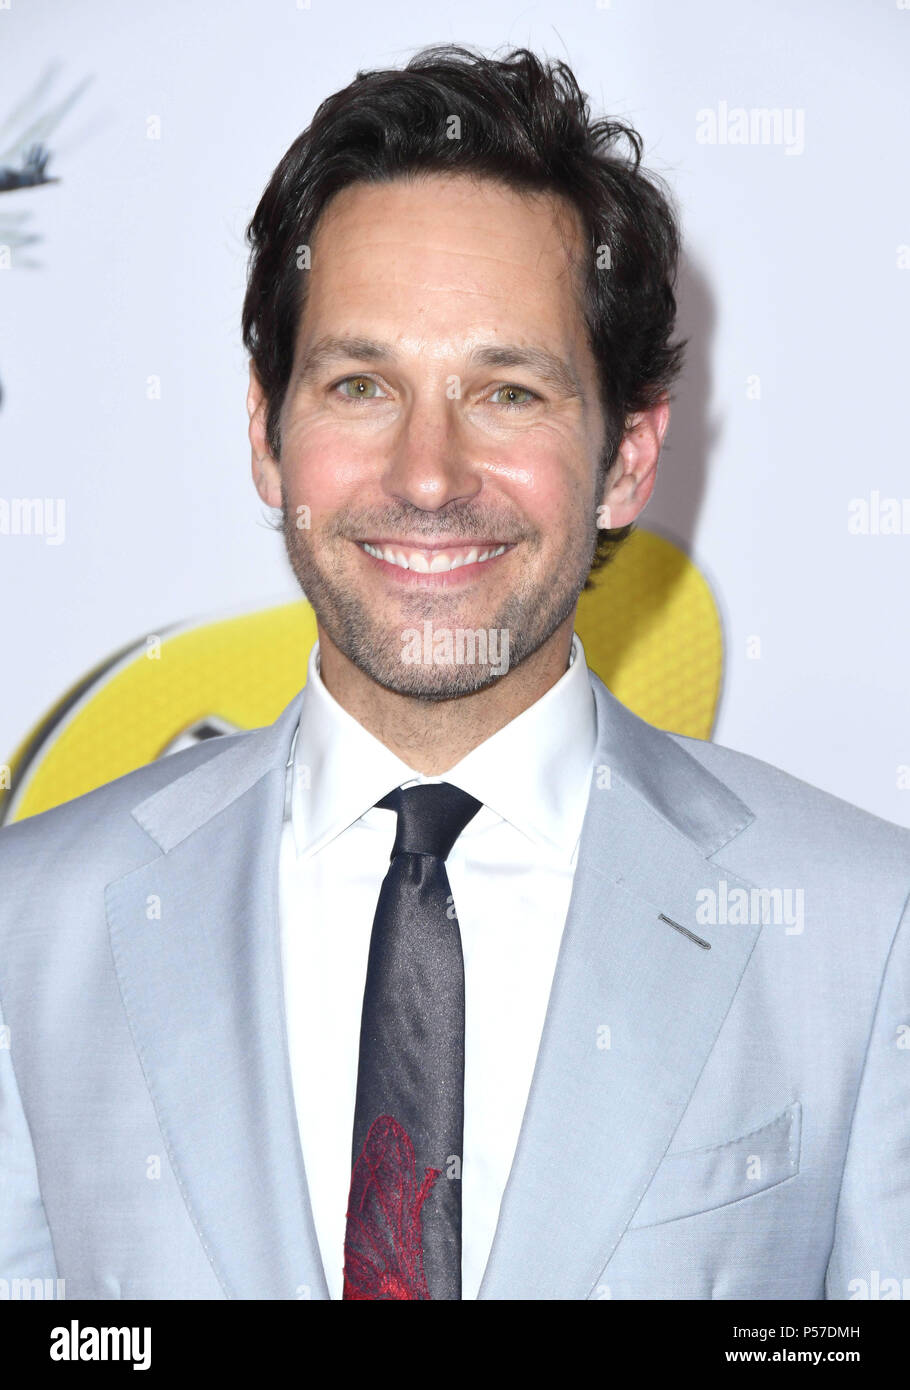 Hollywood, CA, USA. 25th June, 2018. 25 June 2018 - Hollywood, California - Paul Rudd. ''Ant-Man and The Wasp' Los Angeles Premiere held at theEl Capitan Theatre. Photo Credit: Birdie Thompson/AdMedia Credit: Birdie Thompson/AdMedia/ZUMA Wire/Alamy Live News Stock Photo